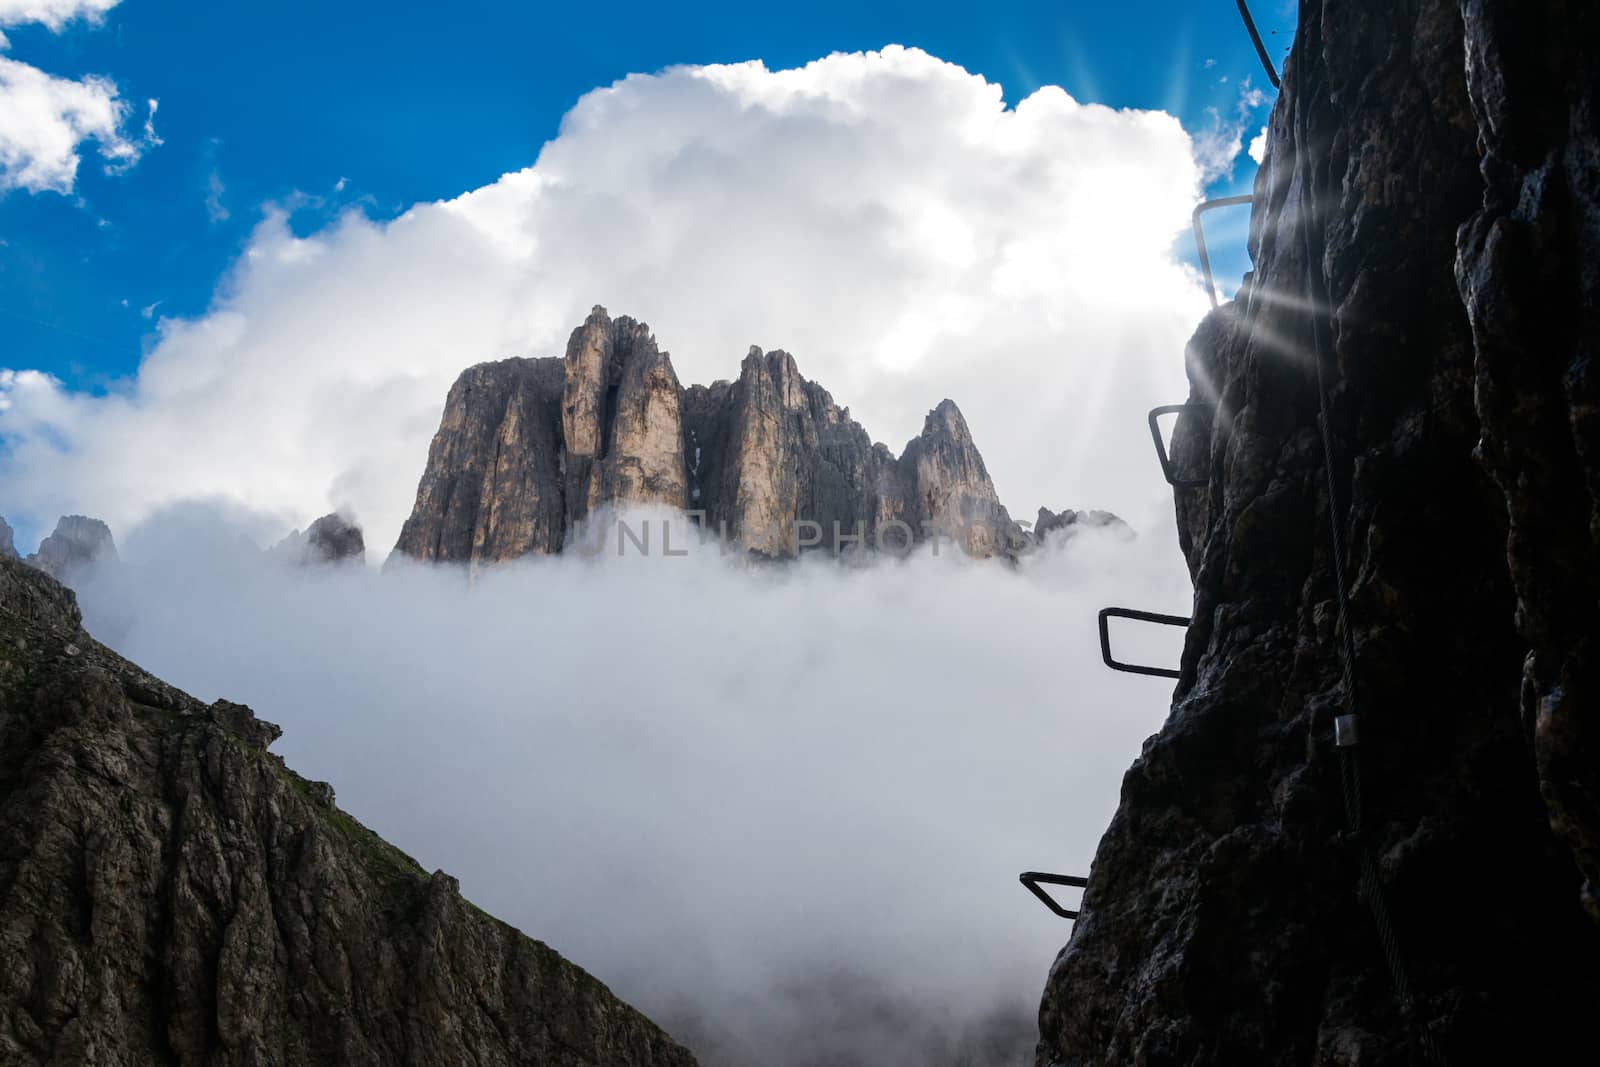 View of a via ferrata with mountains in background by enrico.lapponi